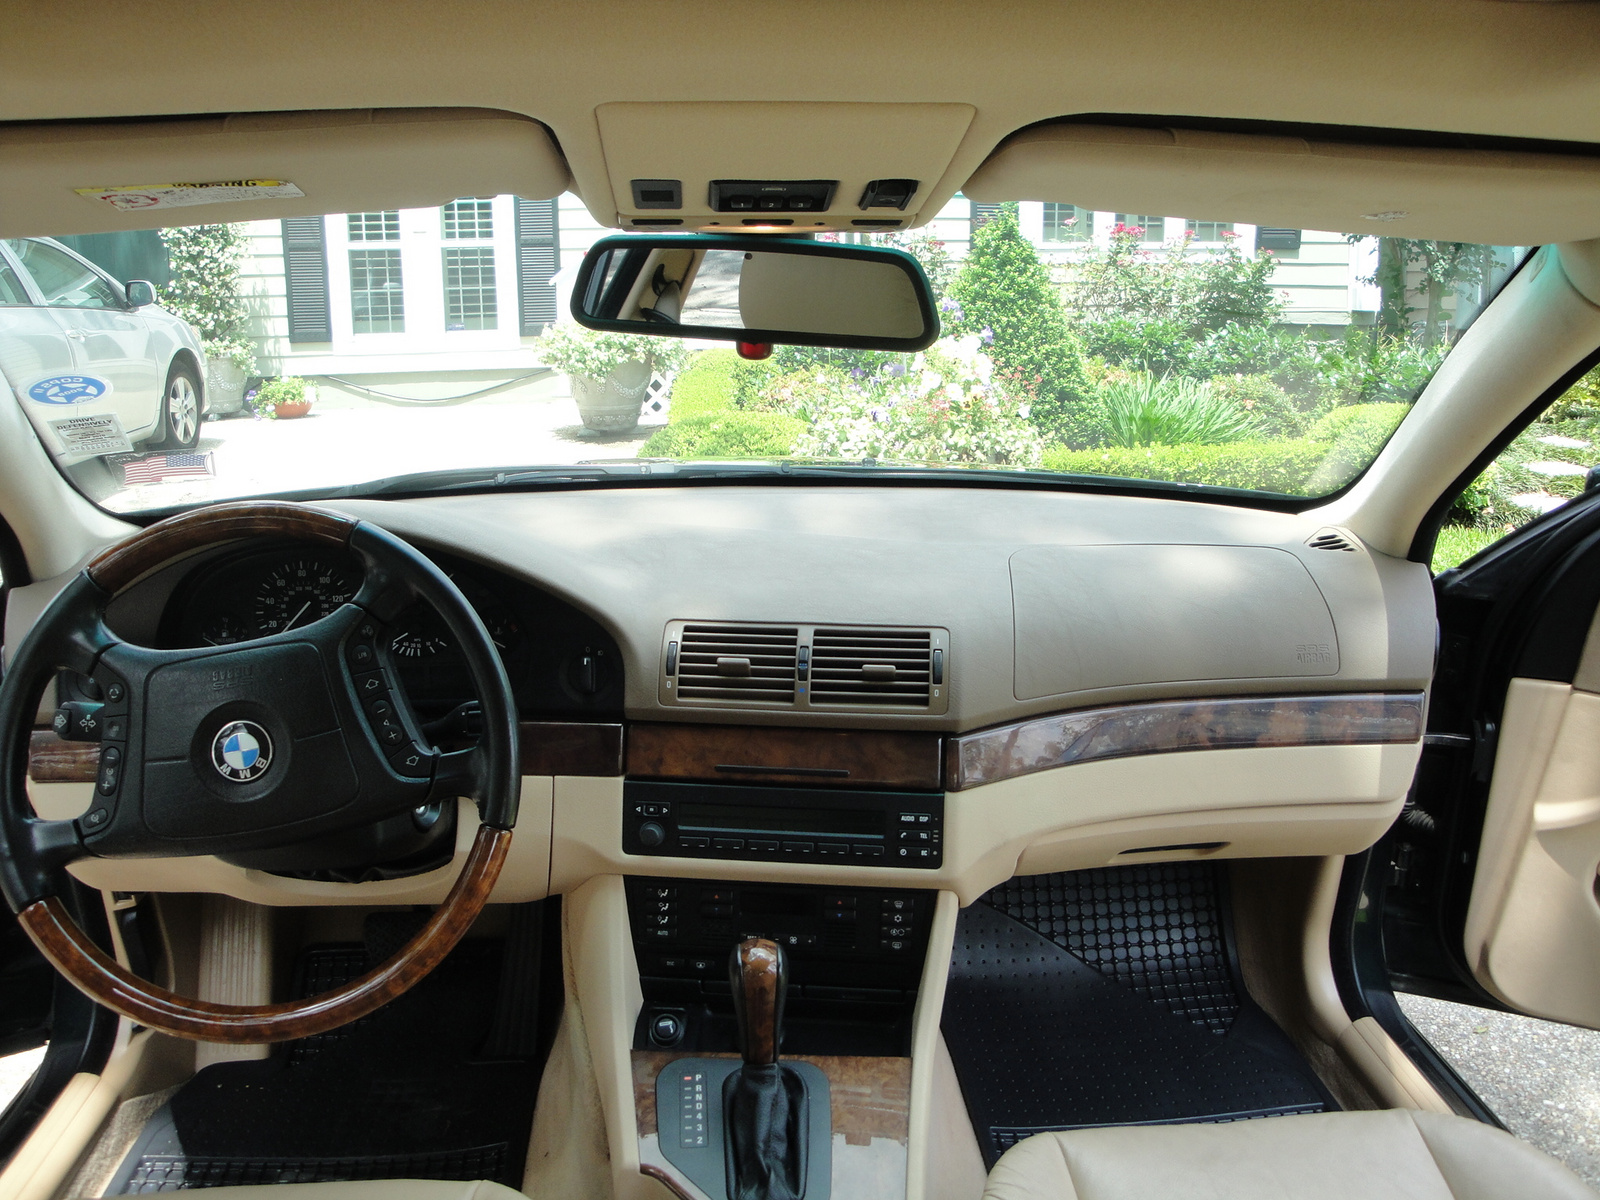 2001 BMW 5 Series 540i, Picture of 2001 BMW 540i, interior